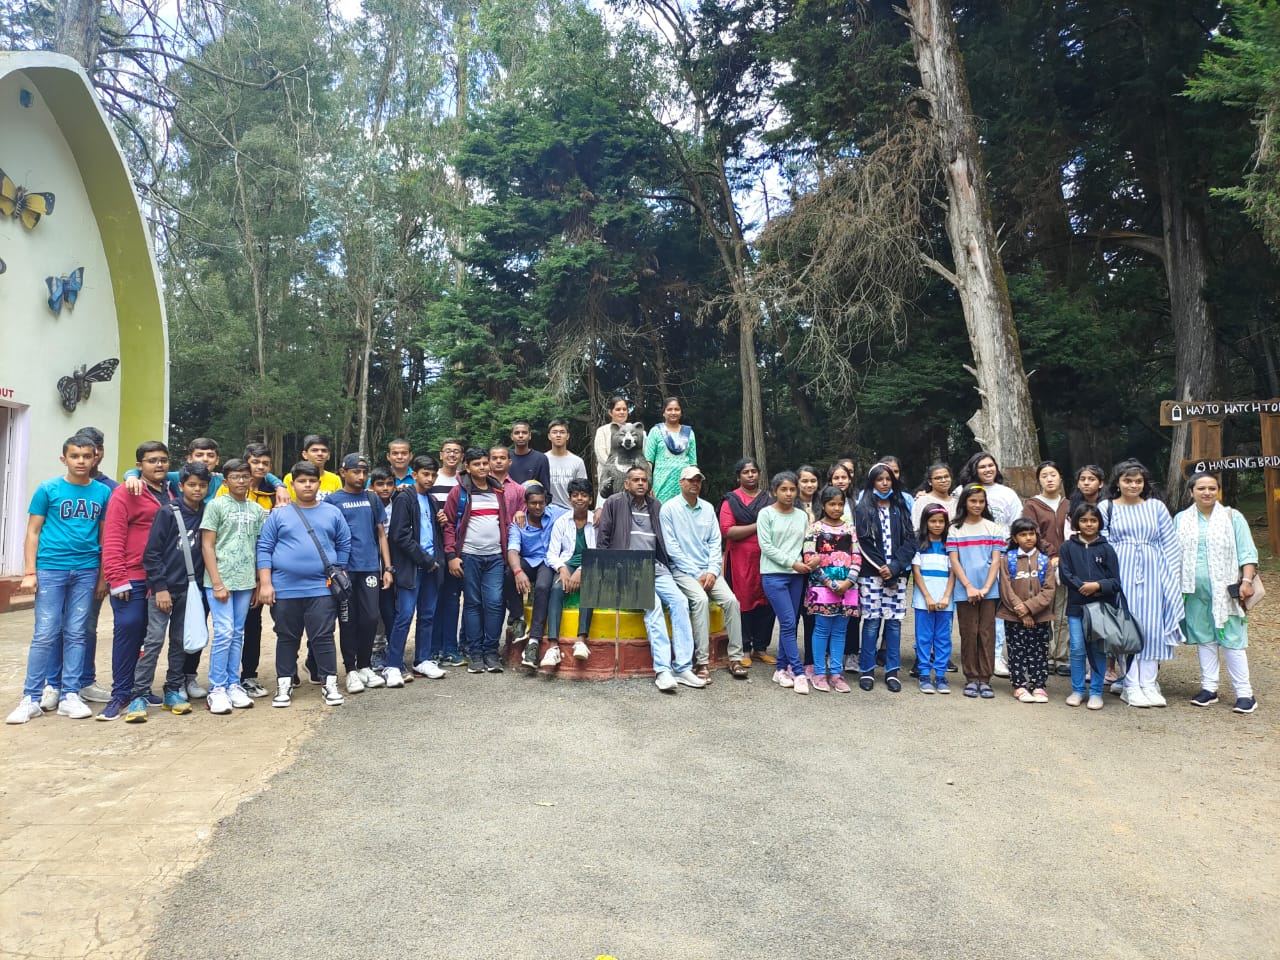 students-and-teachers-from-jssps-at-cairn-hill-and-karnataka-garden-ooty